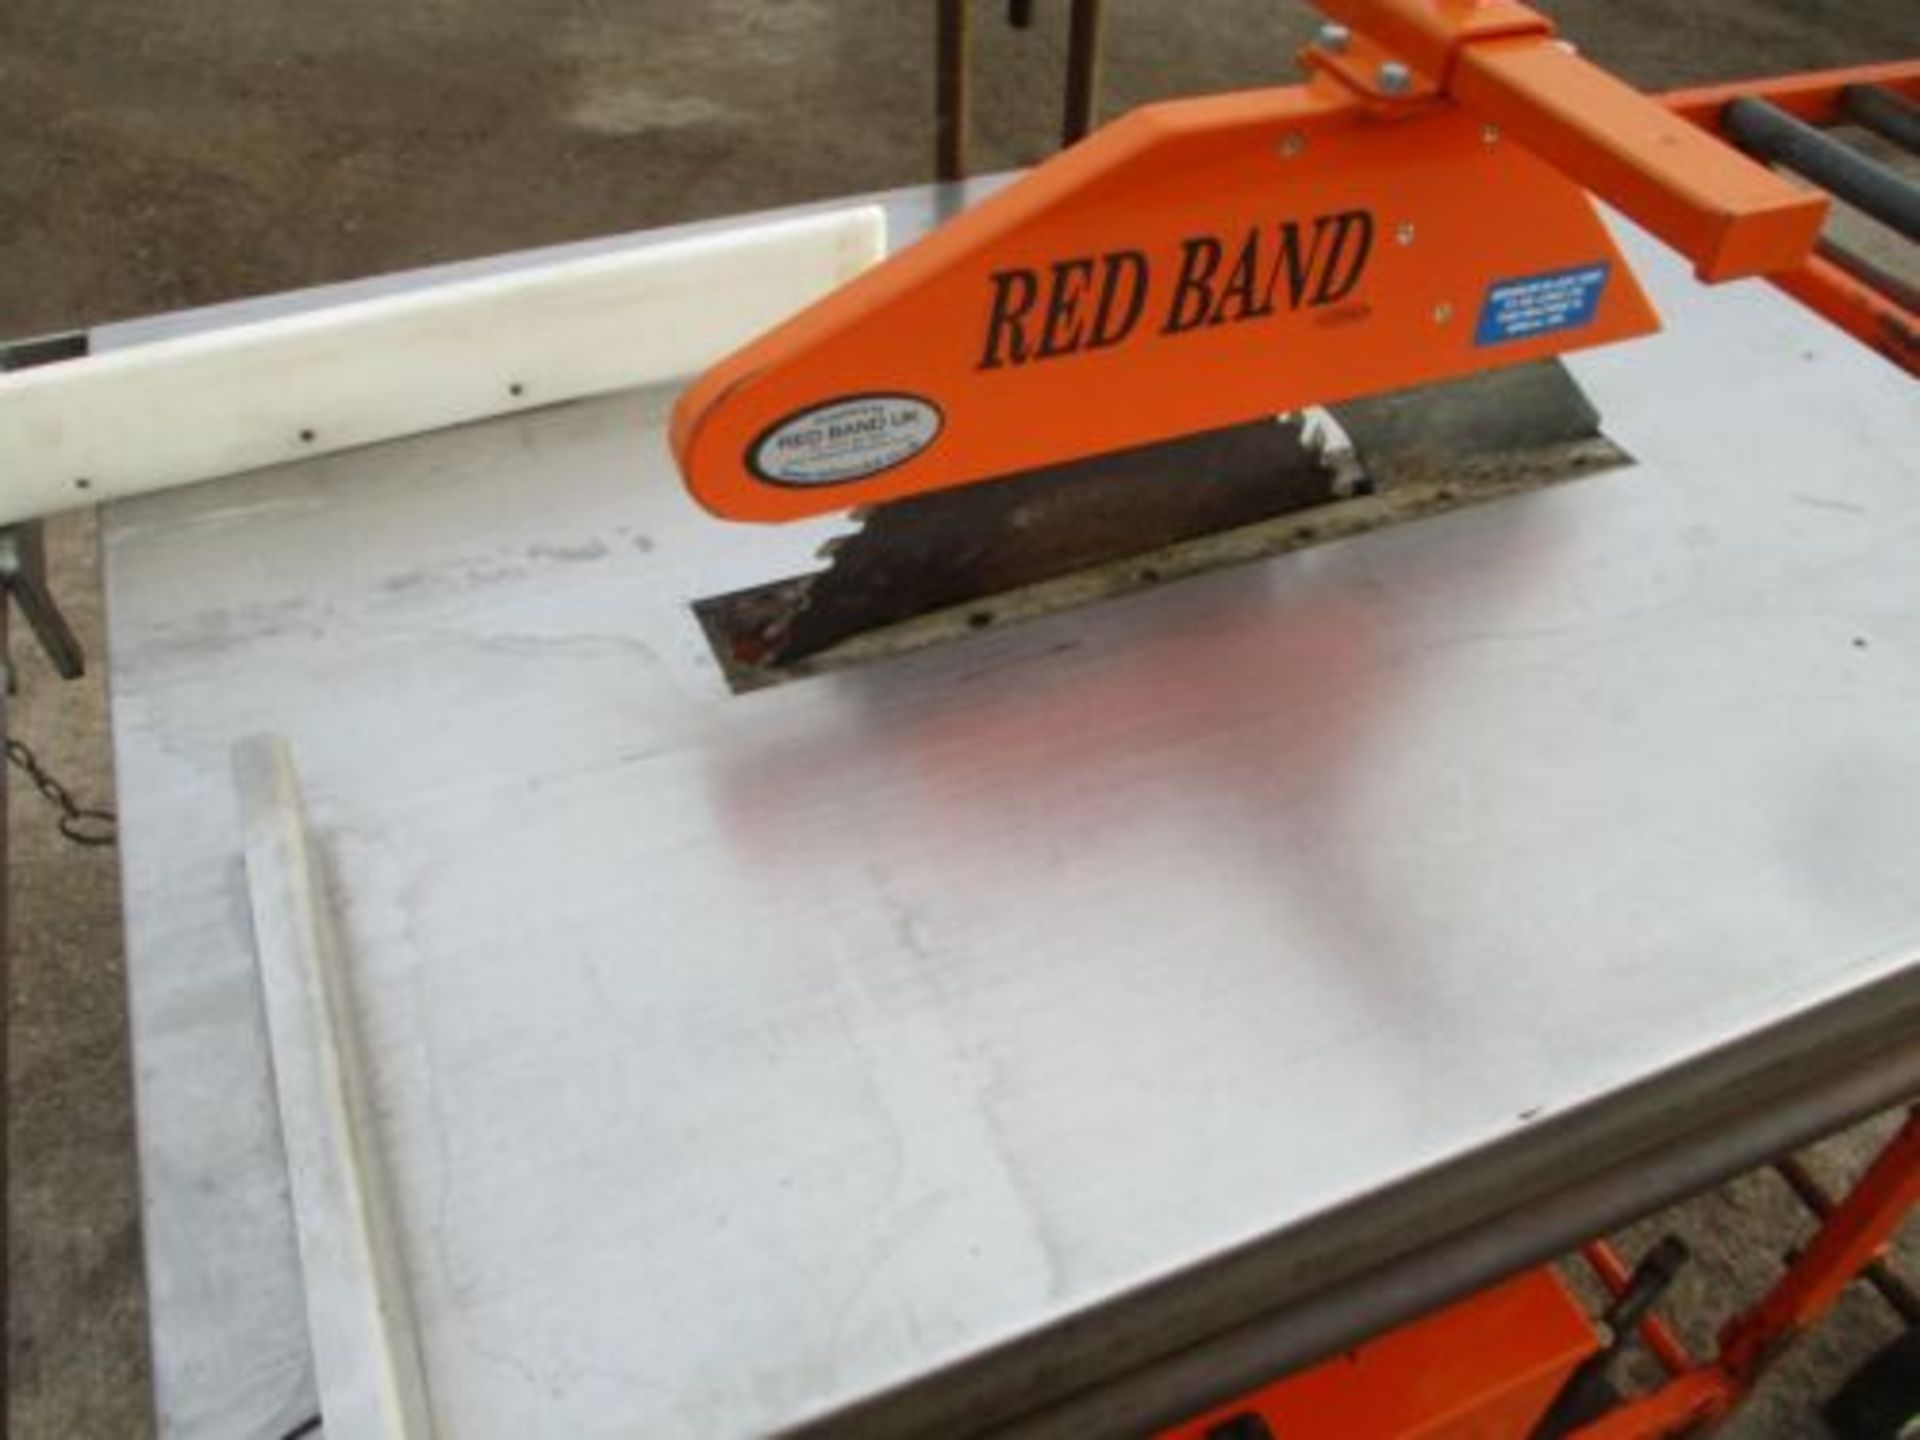 RED BAND WSA400 16" SITE WOOD SAW BENCH HONDA DIESEL ELECTRIC START - Image 5 of 6